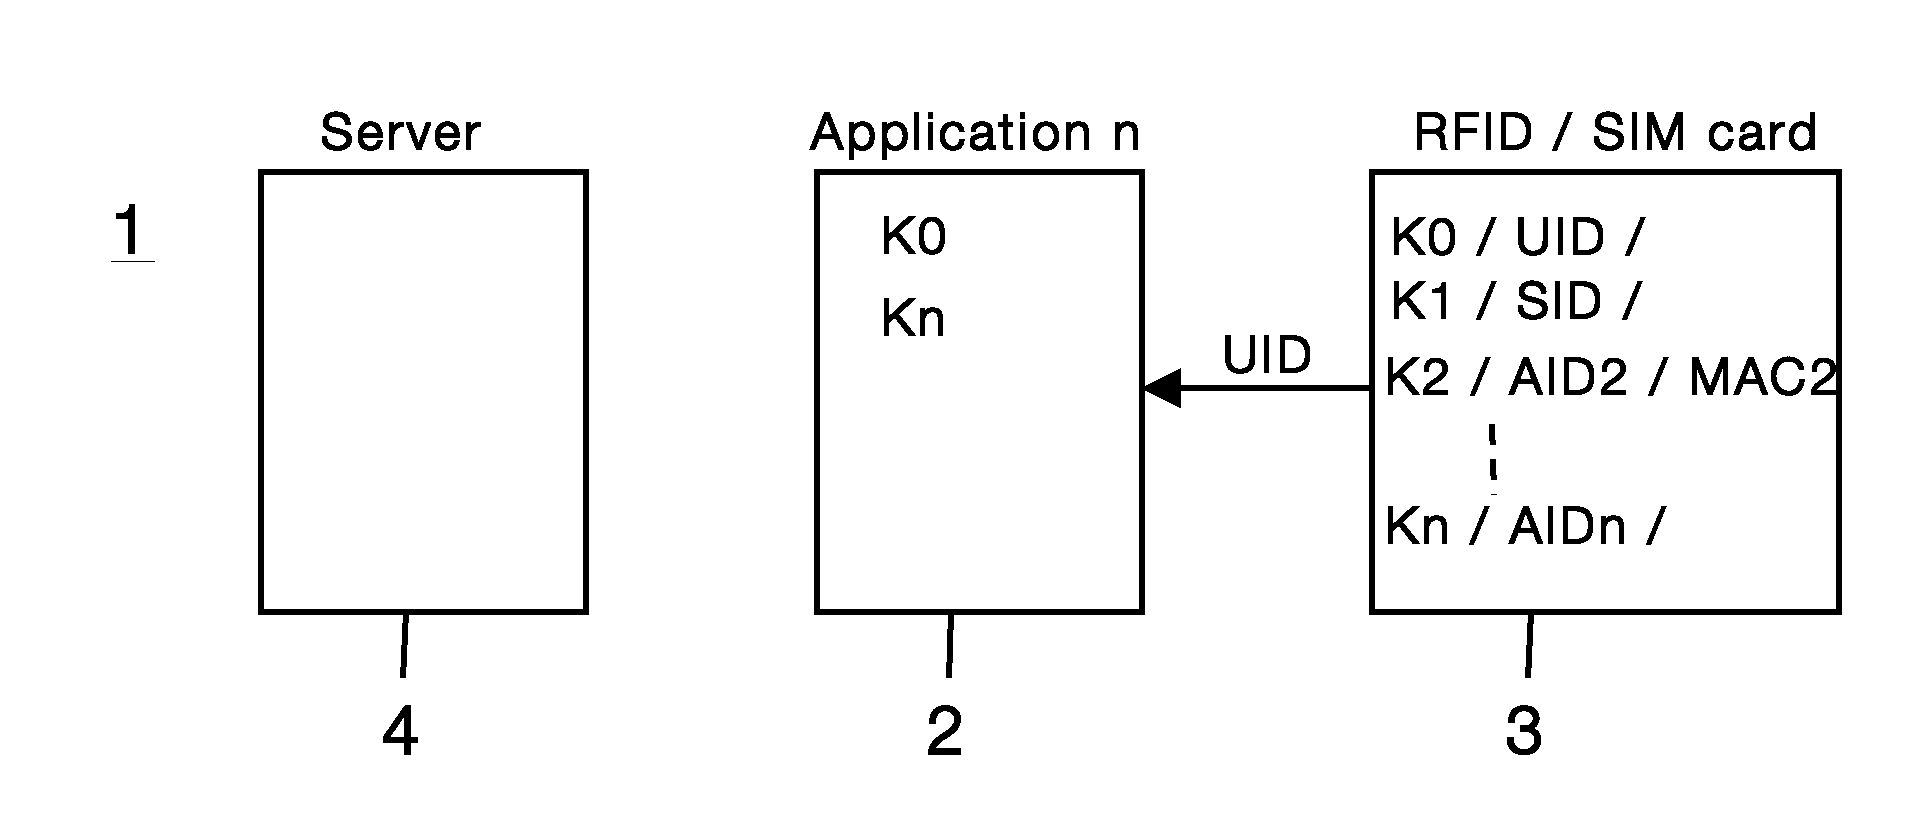 Method and system for authenticating a user by means of an application